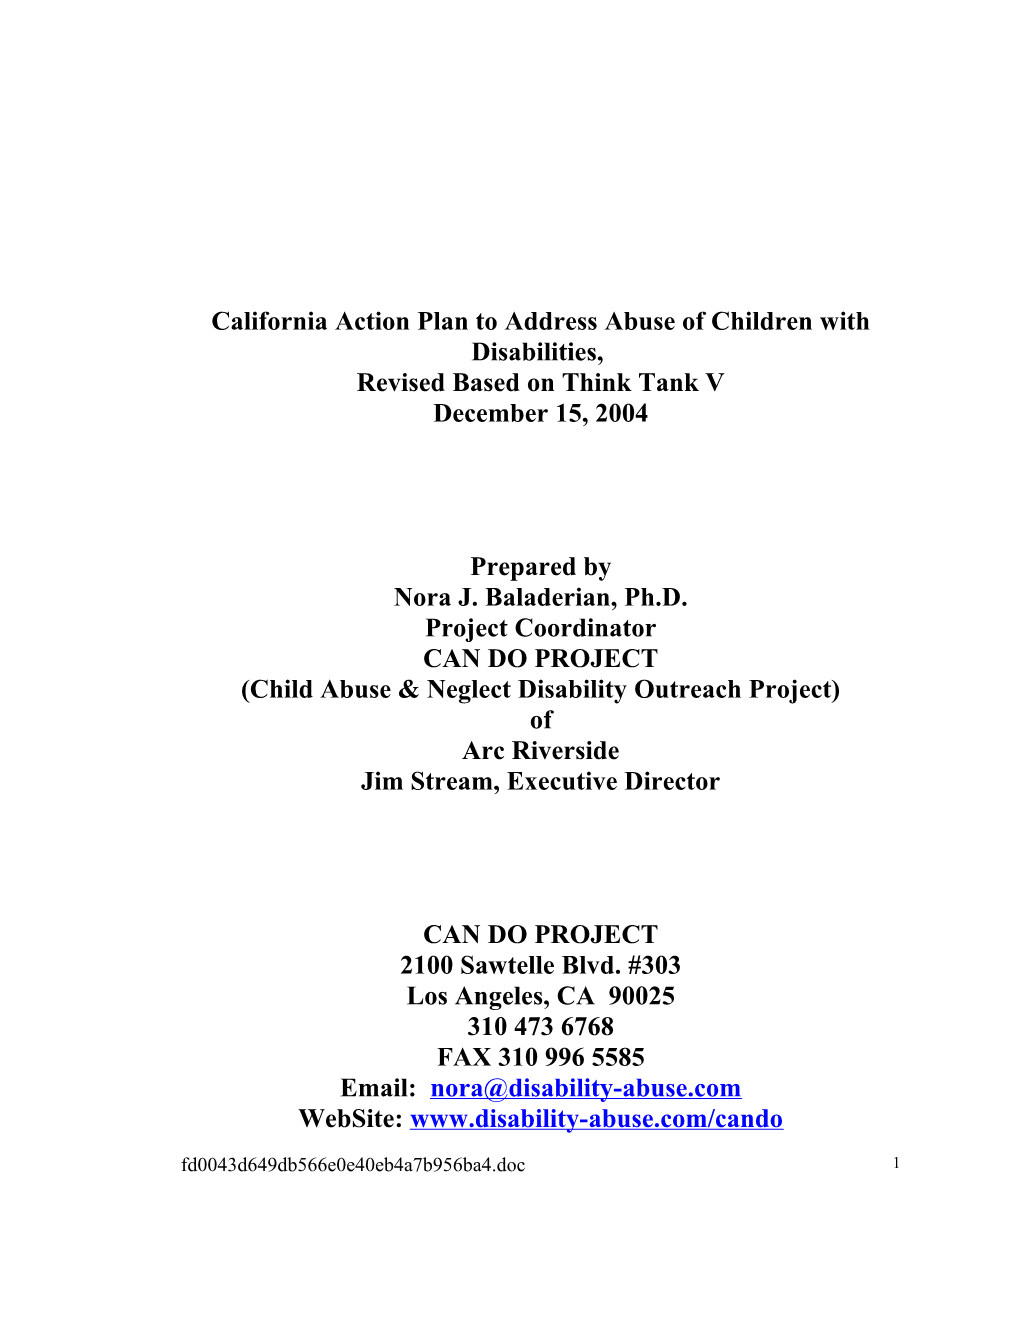 California Think Tank on the Abuse of Children with Disabilities